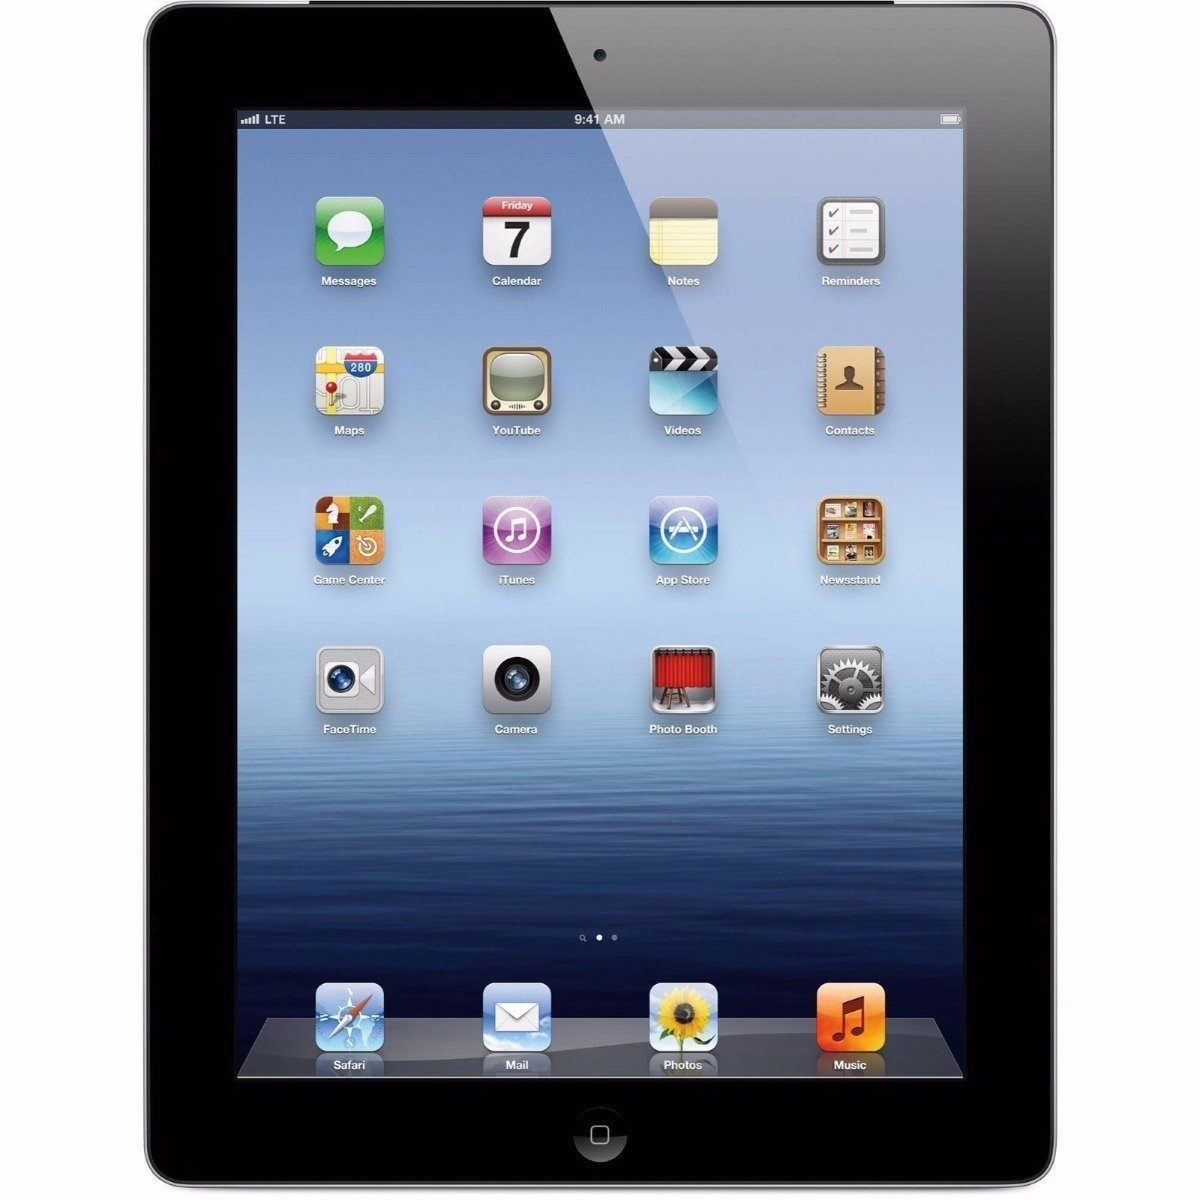 Apple iPad 2 WiFi + 3G Factory Unlocked - Assorted Colors and Sizes / Black / 16GB